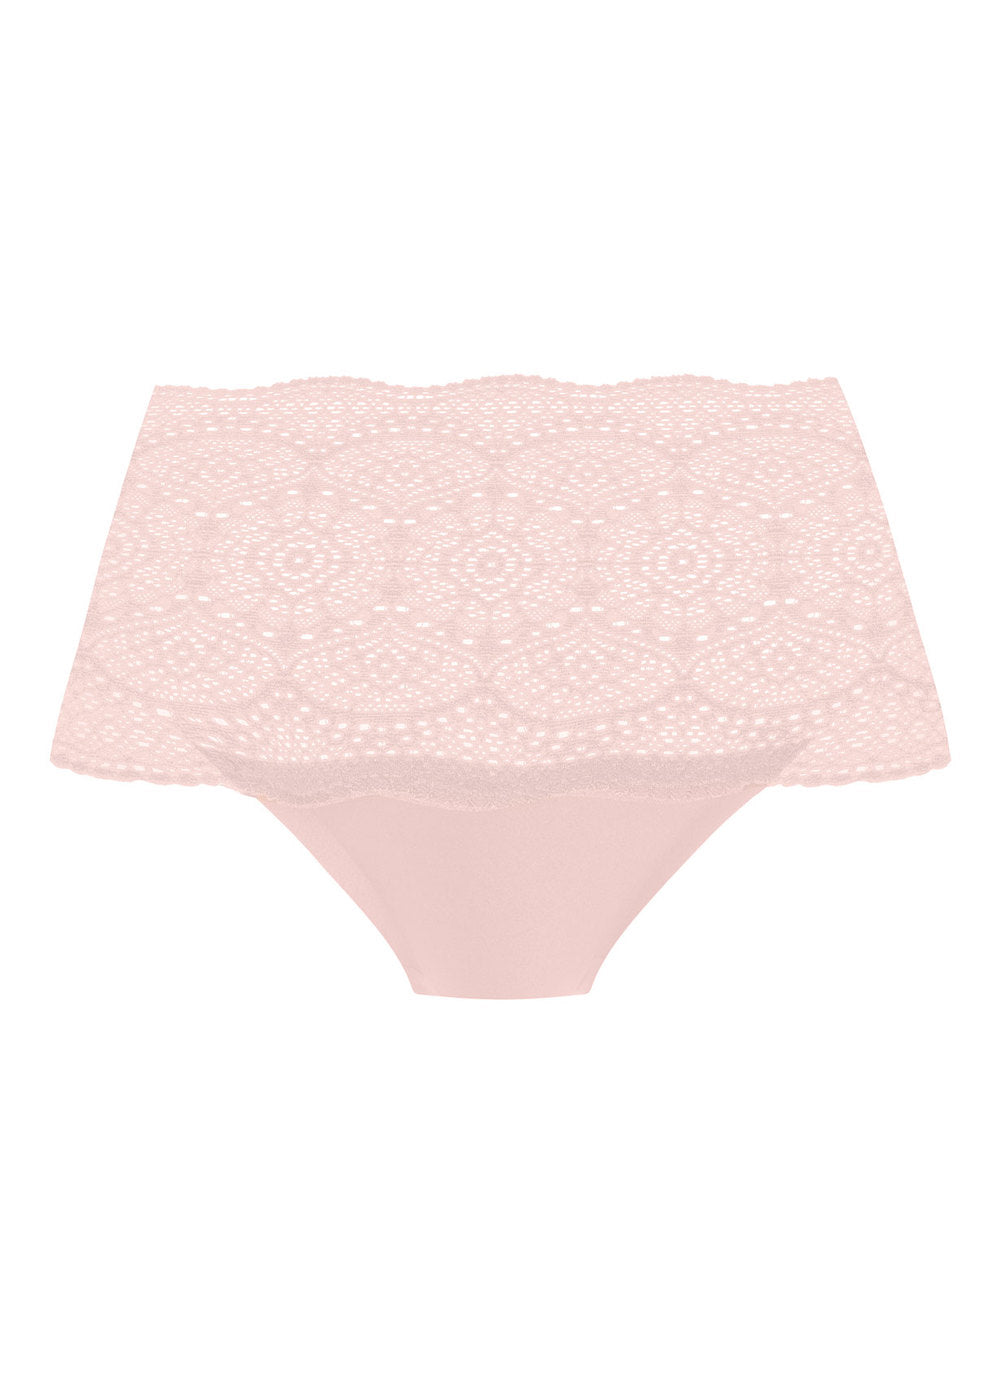 Lace Ease Invisible Stretch Full Brief FL2330 BLH - Blush